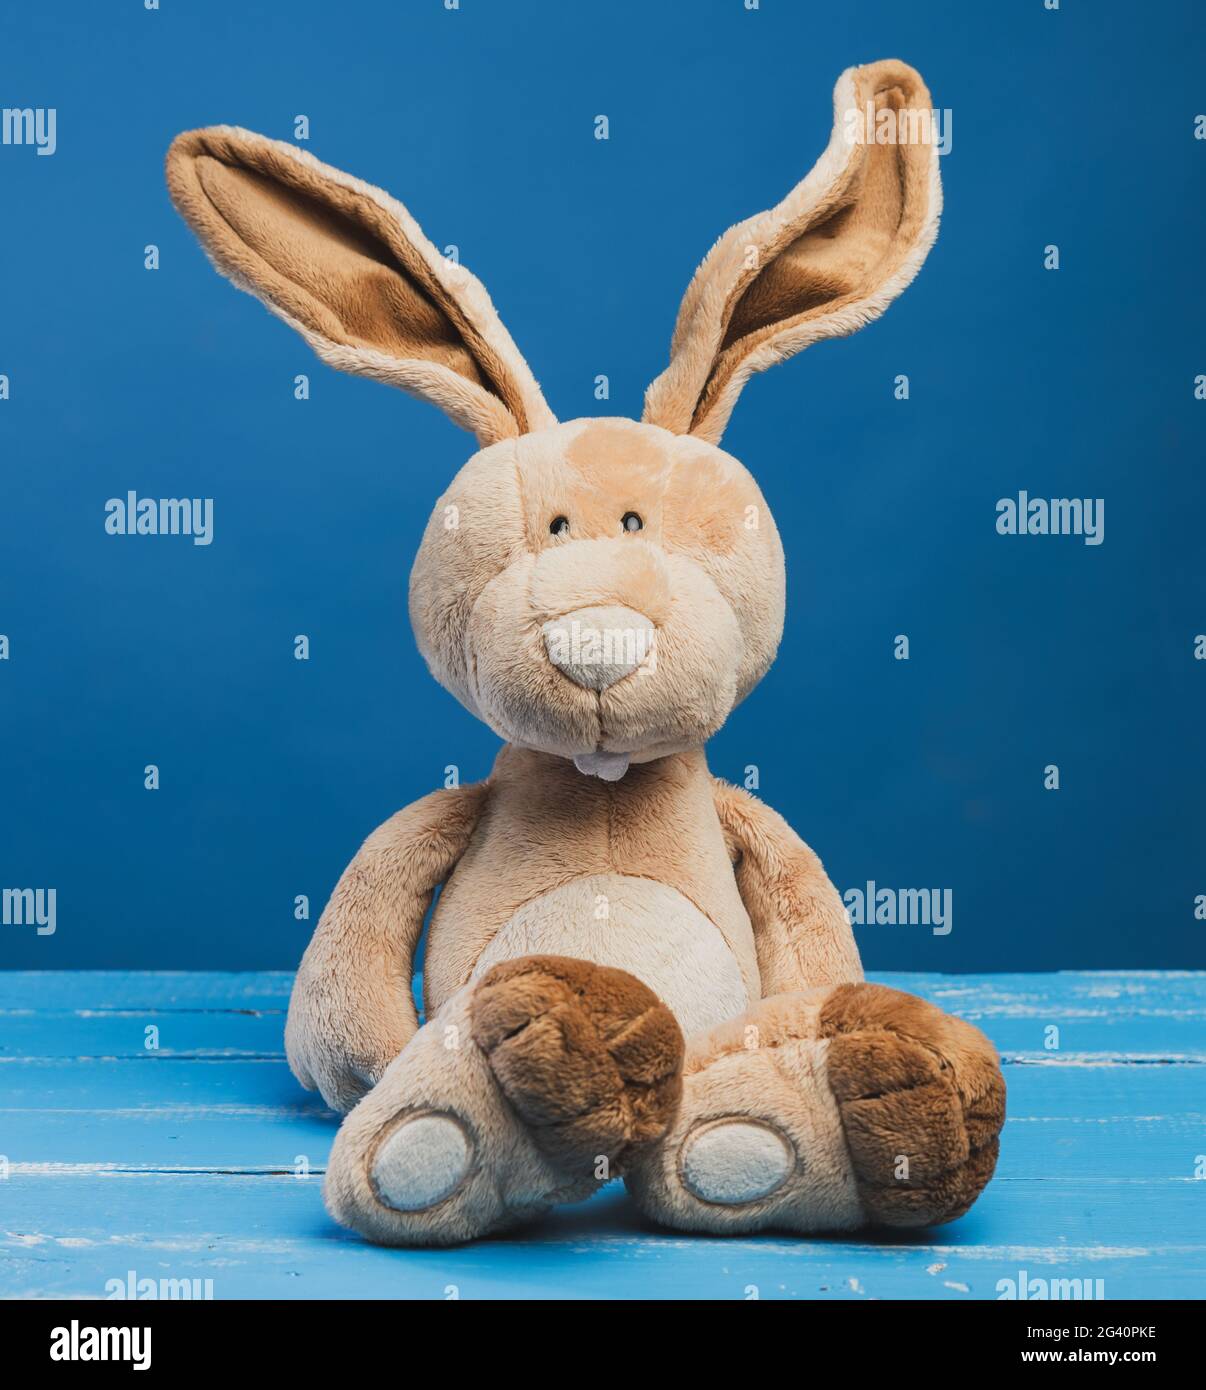 Funny beige plush rabbit with big ears and funny face Stock Photo